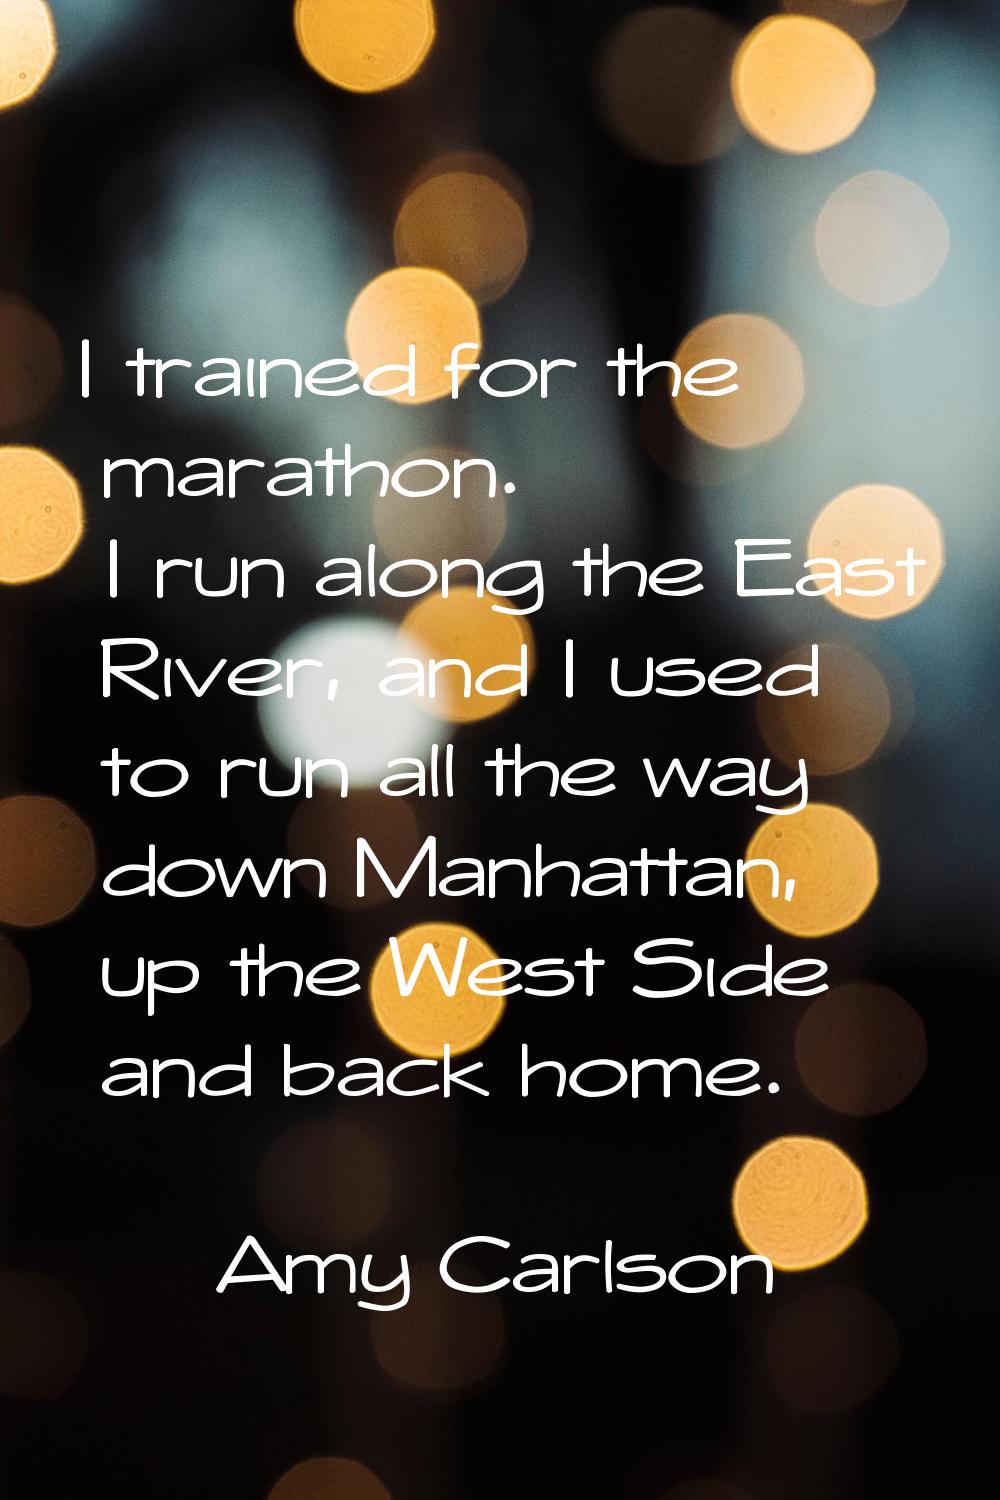 I trained for the marathon. I run along the East River, and I used to run all the way down Manhatta